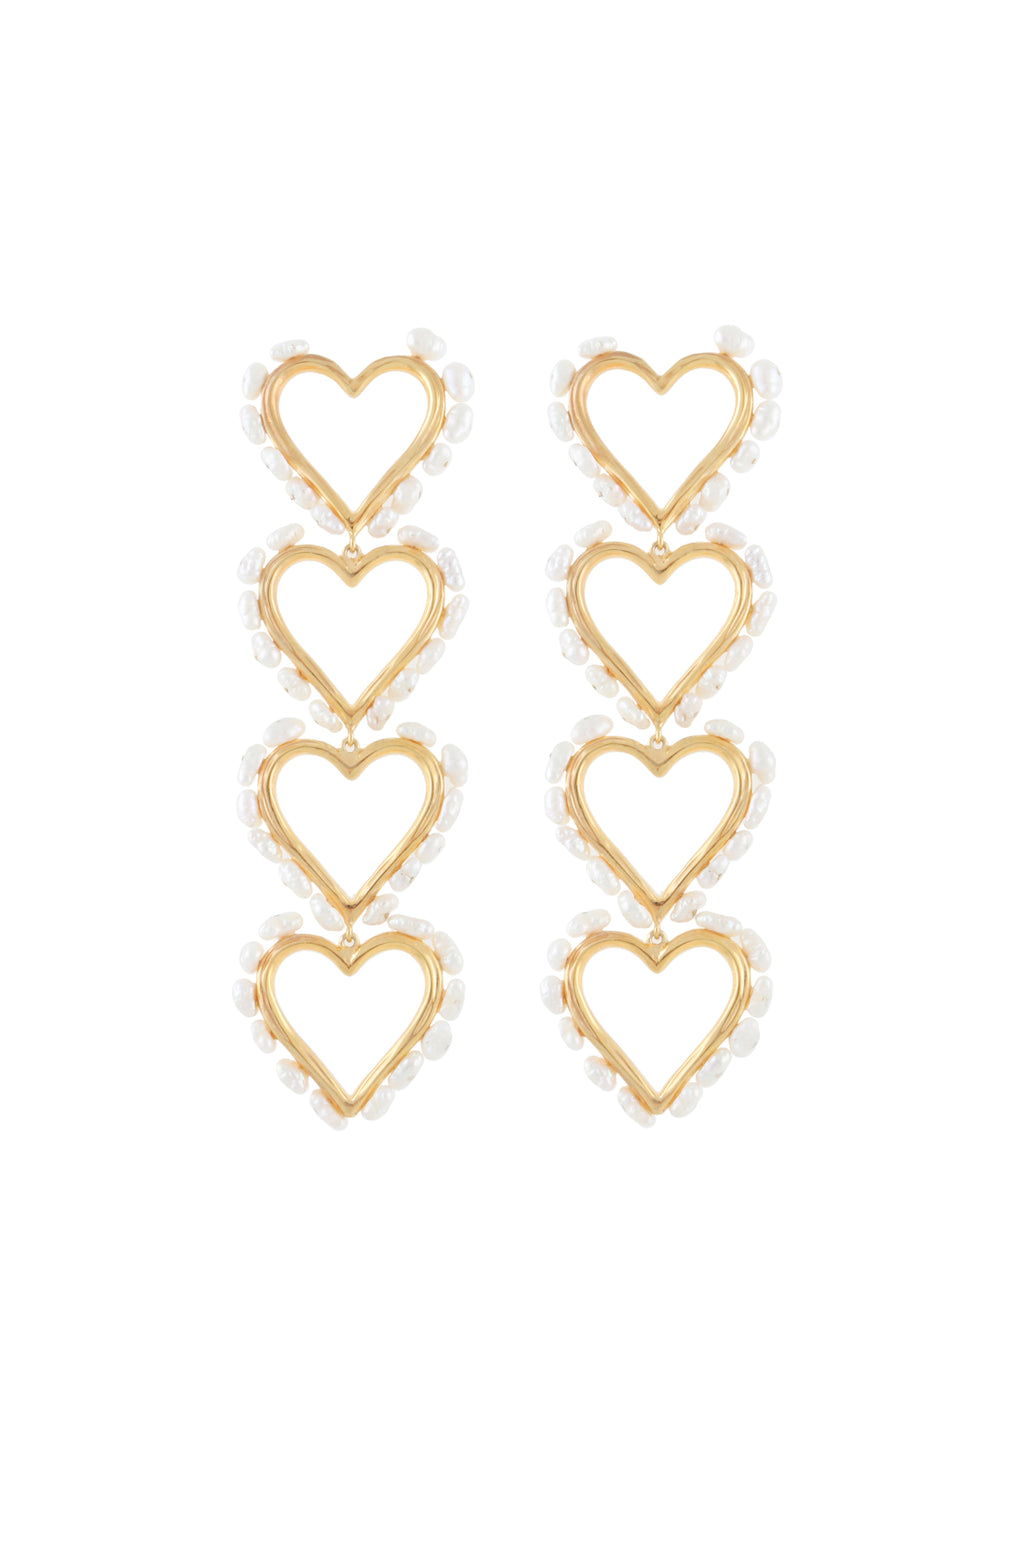 STATEMENT HEARTS EARRINGS WITH MINI PEARLS